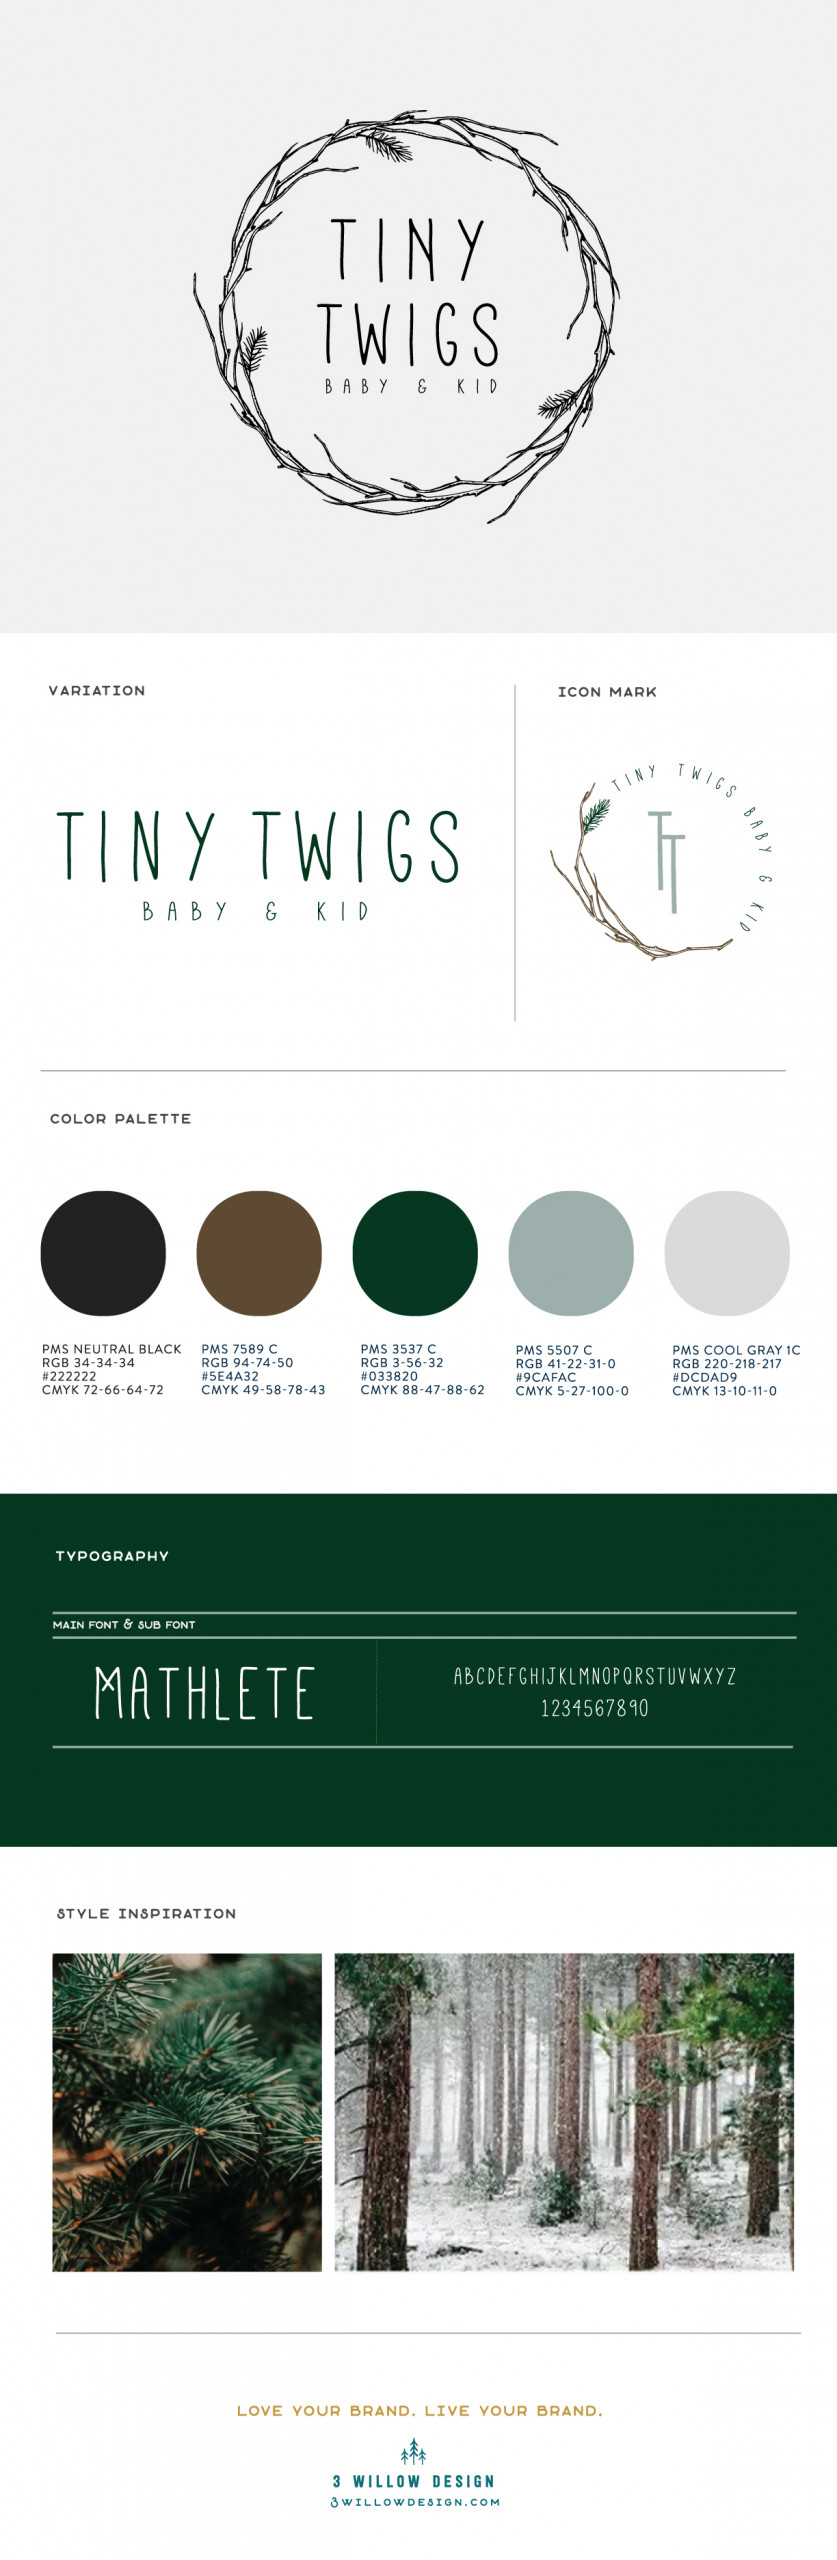 Tiny Twigs baby & kid, children's boutique logo and branding